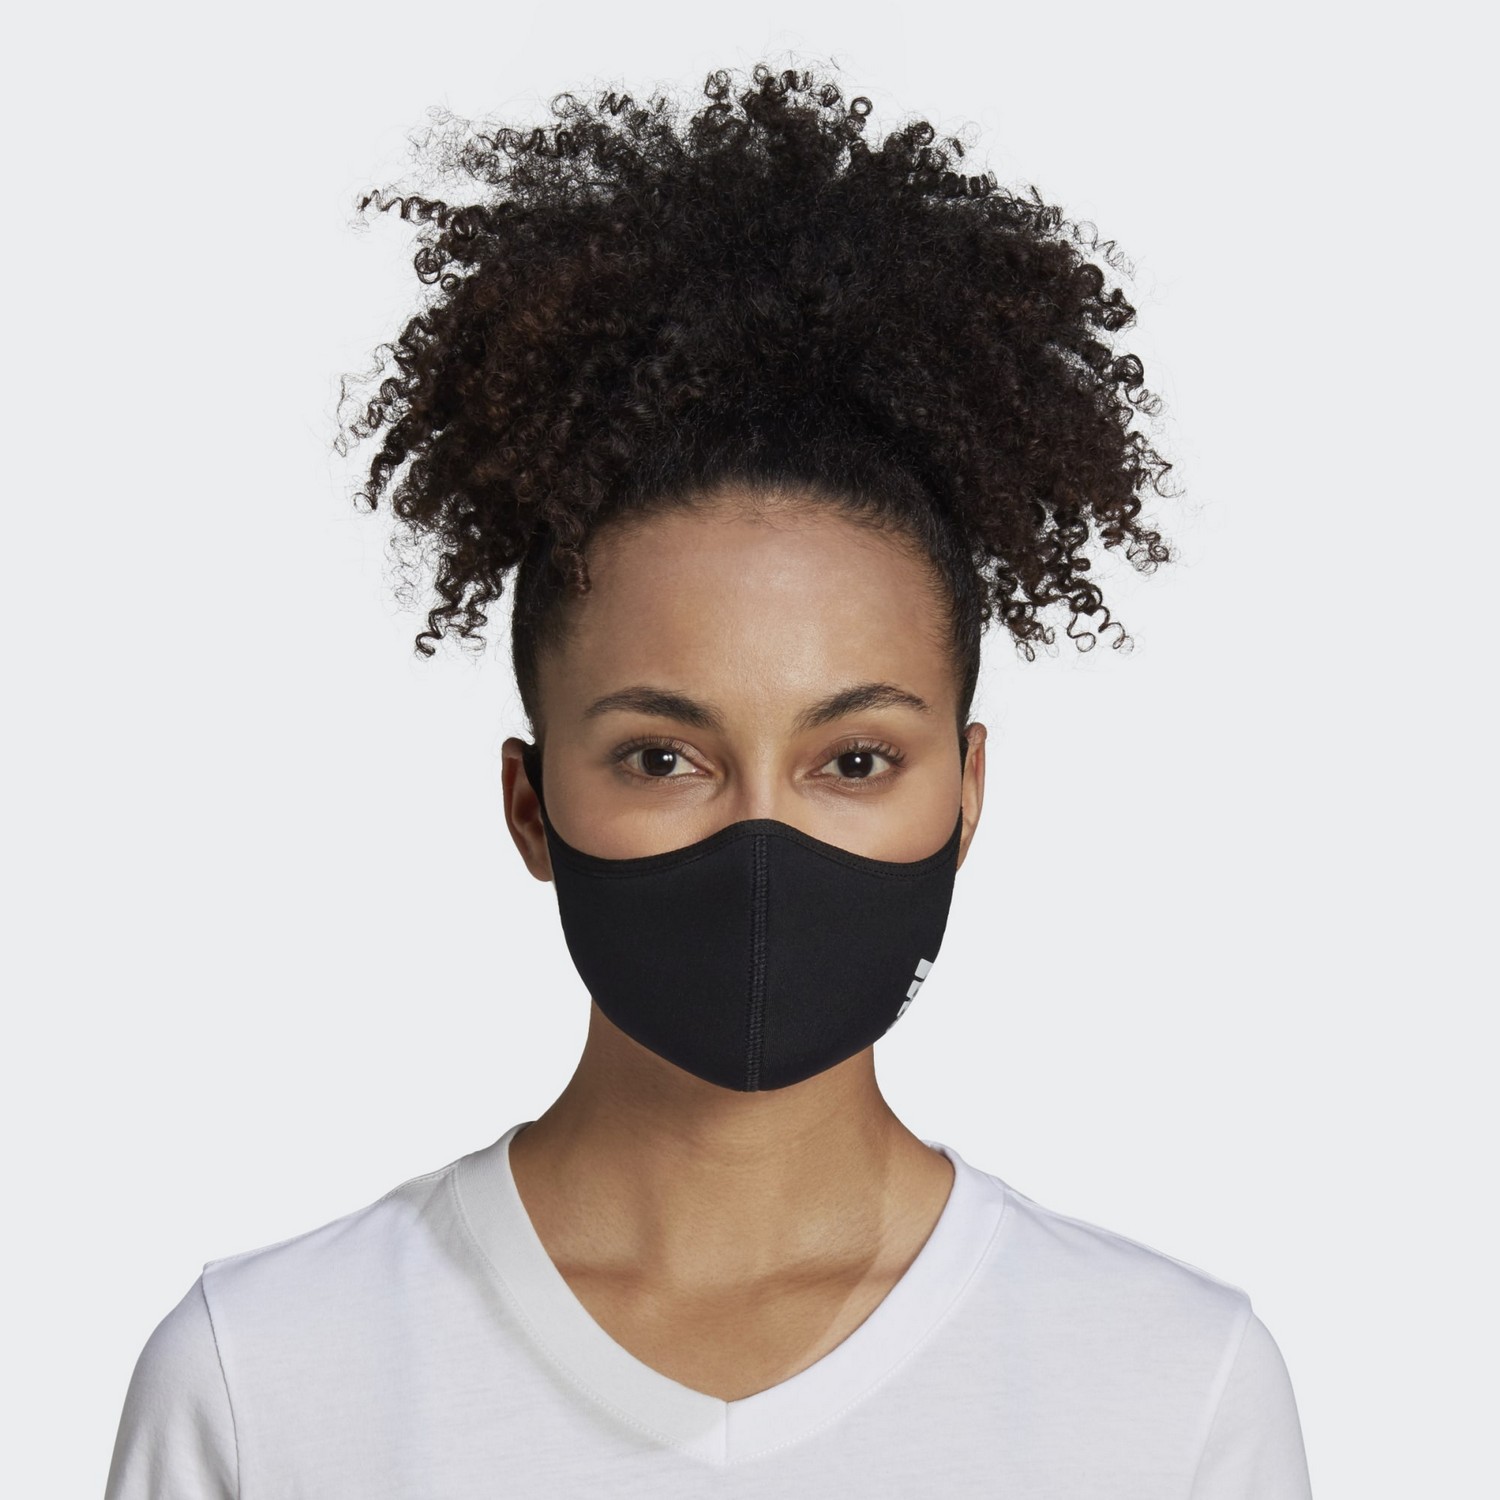 adidas-face-mask-launch-date -june-15-2020